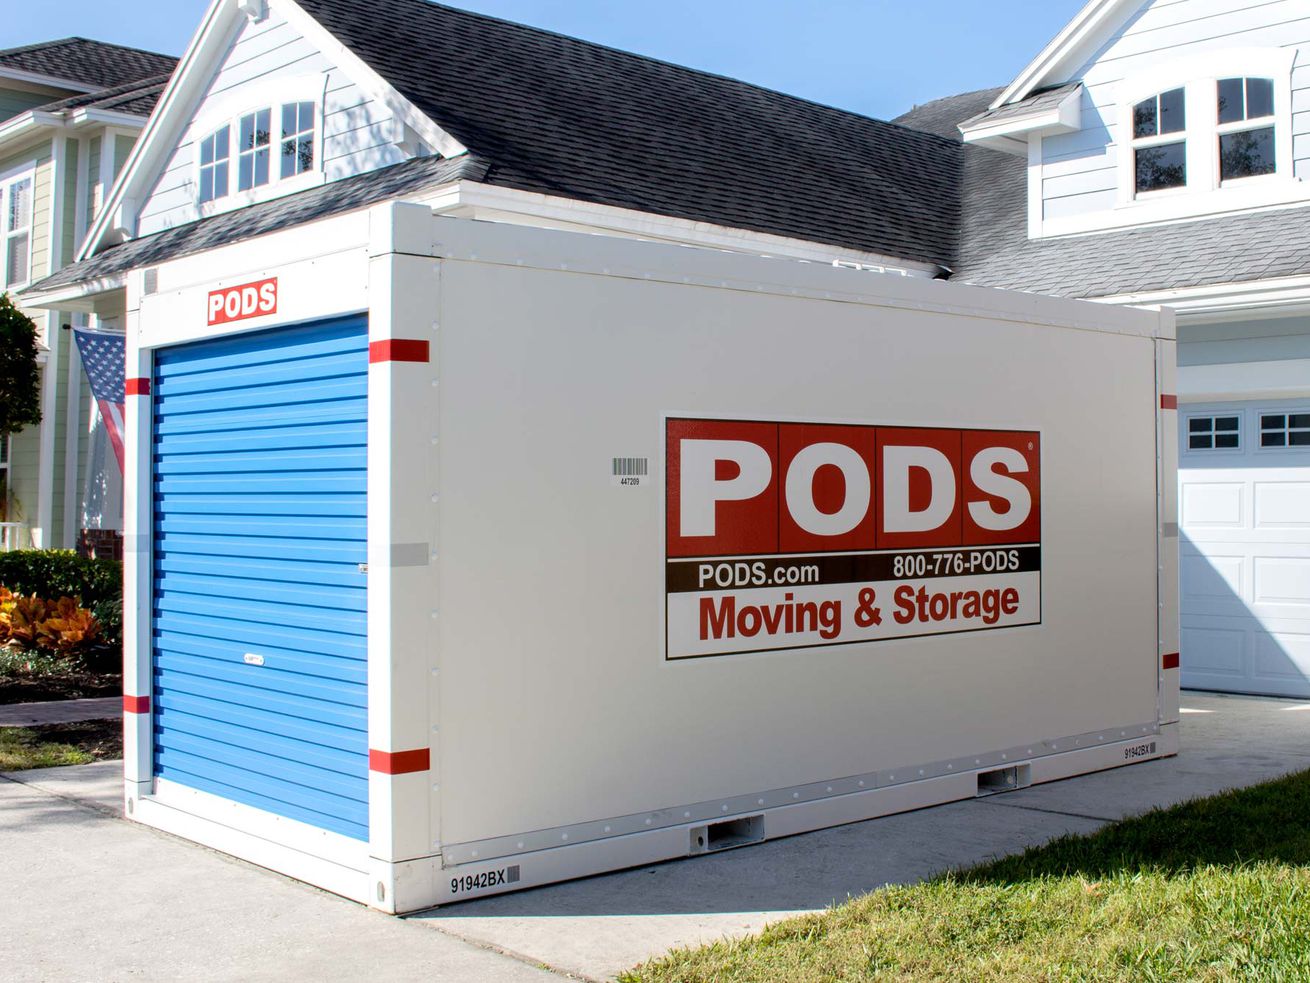 PODS storage container in front of a home